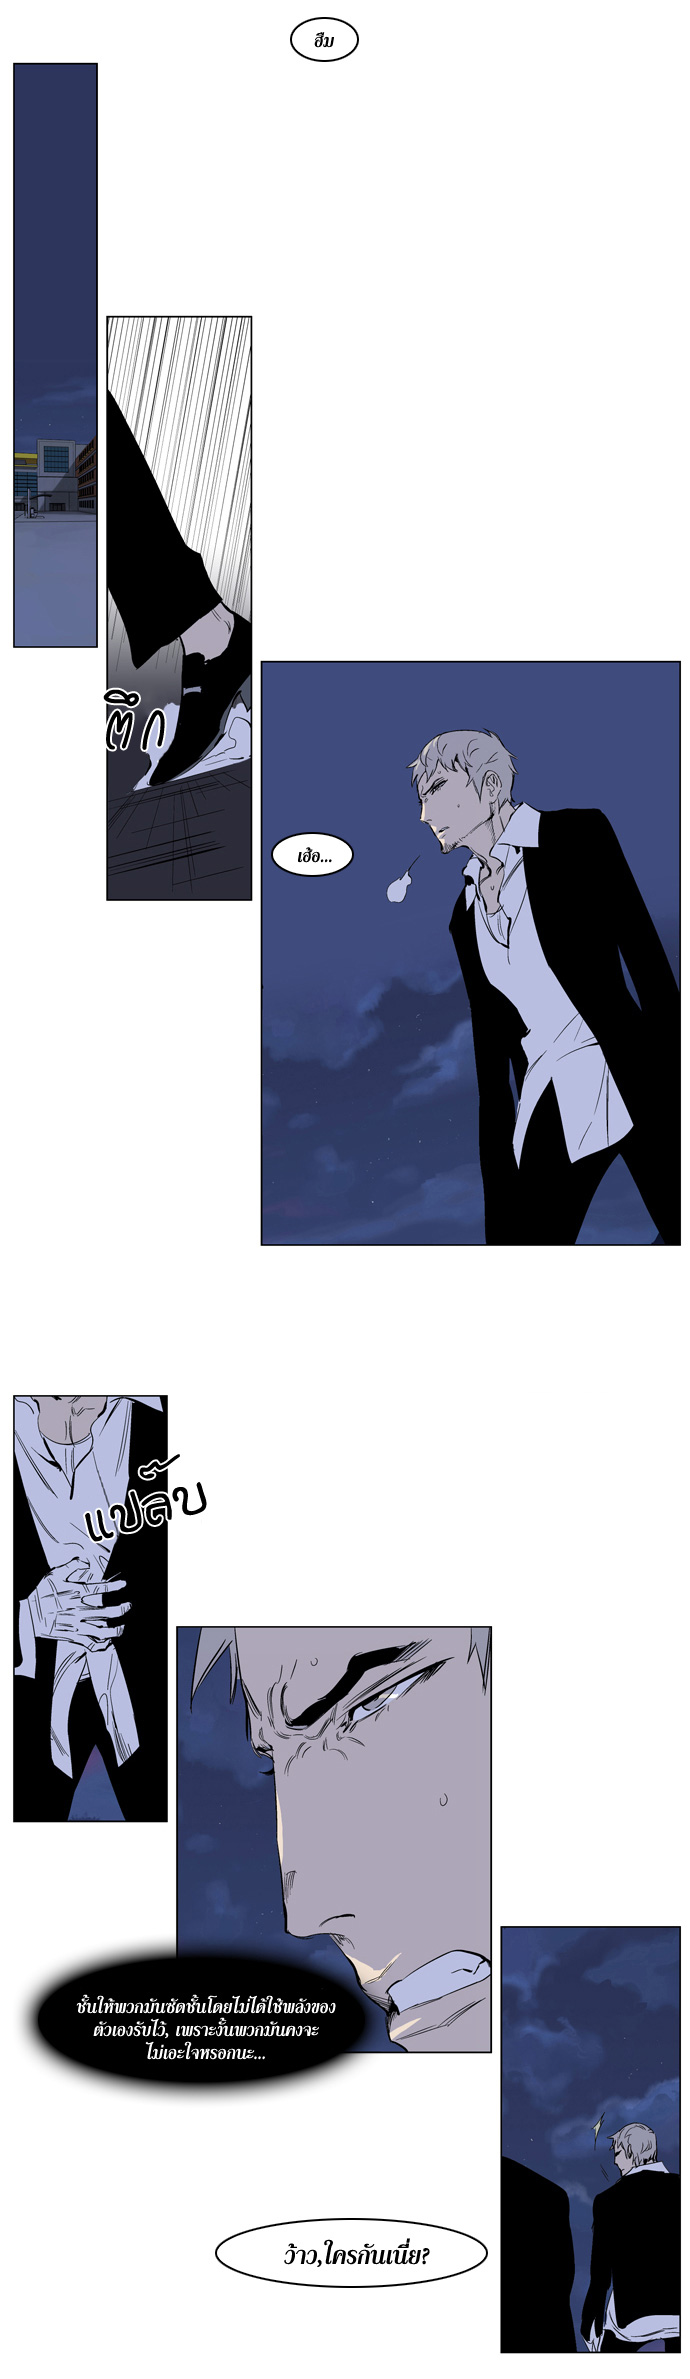 Noblesse 221 020